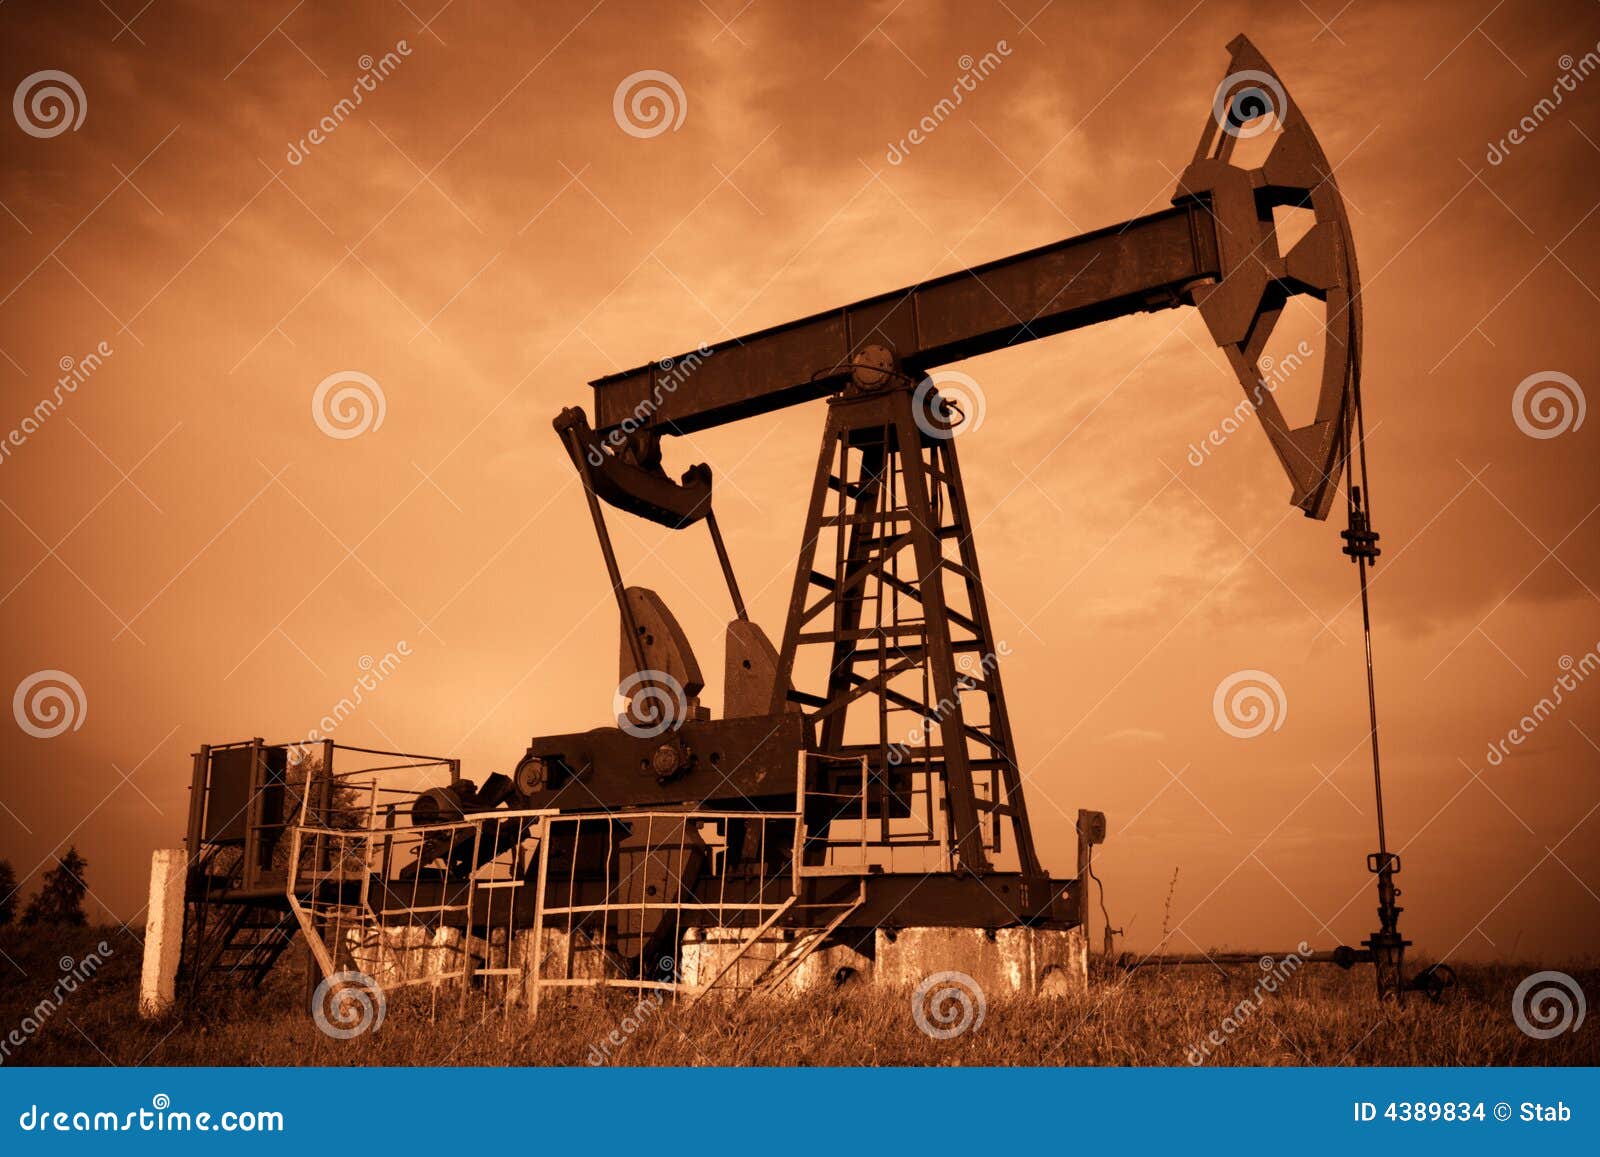 Oil pump jack stock image created by Stab